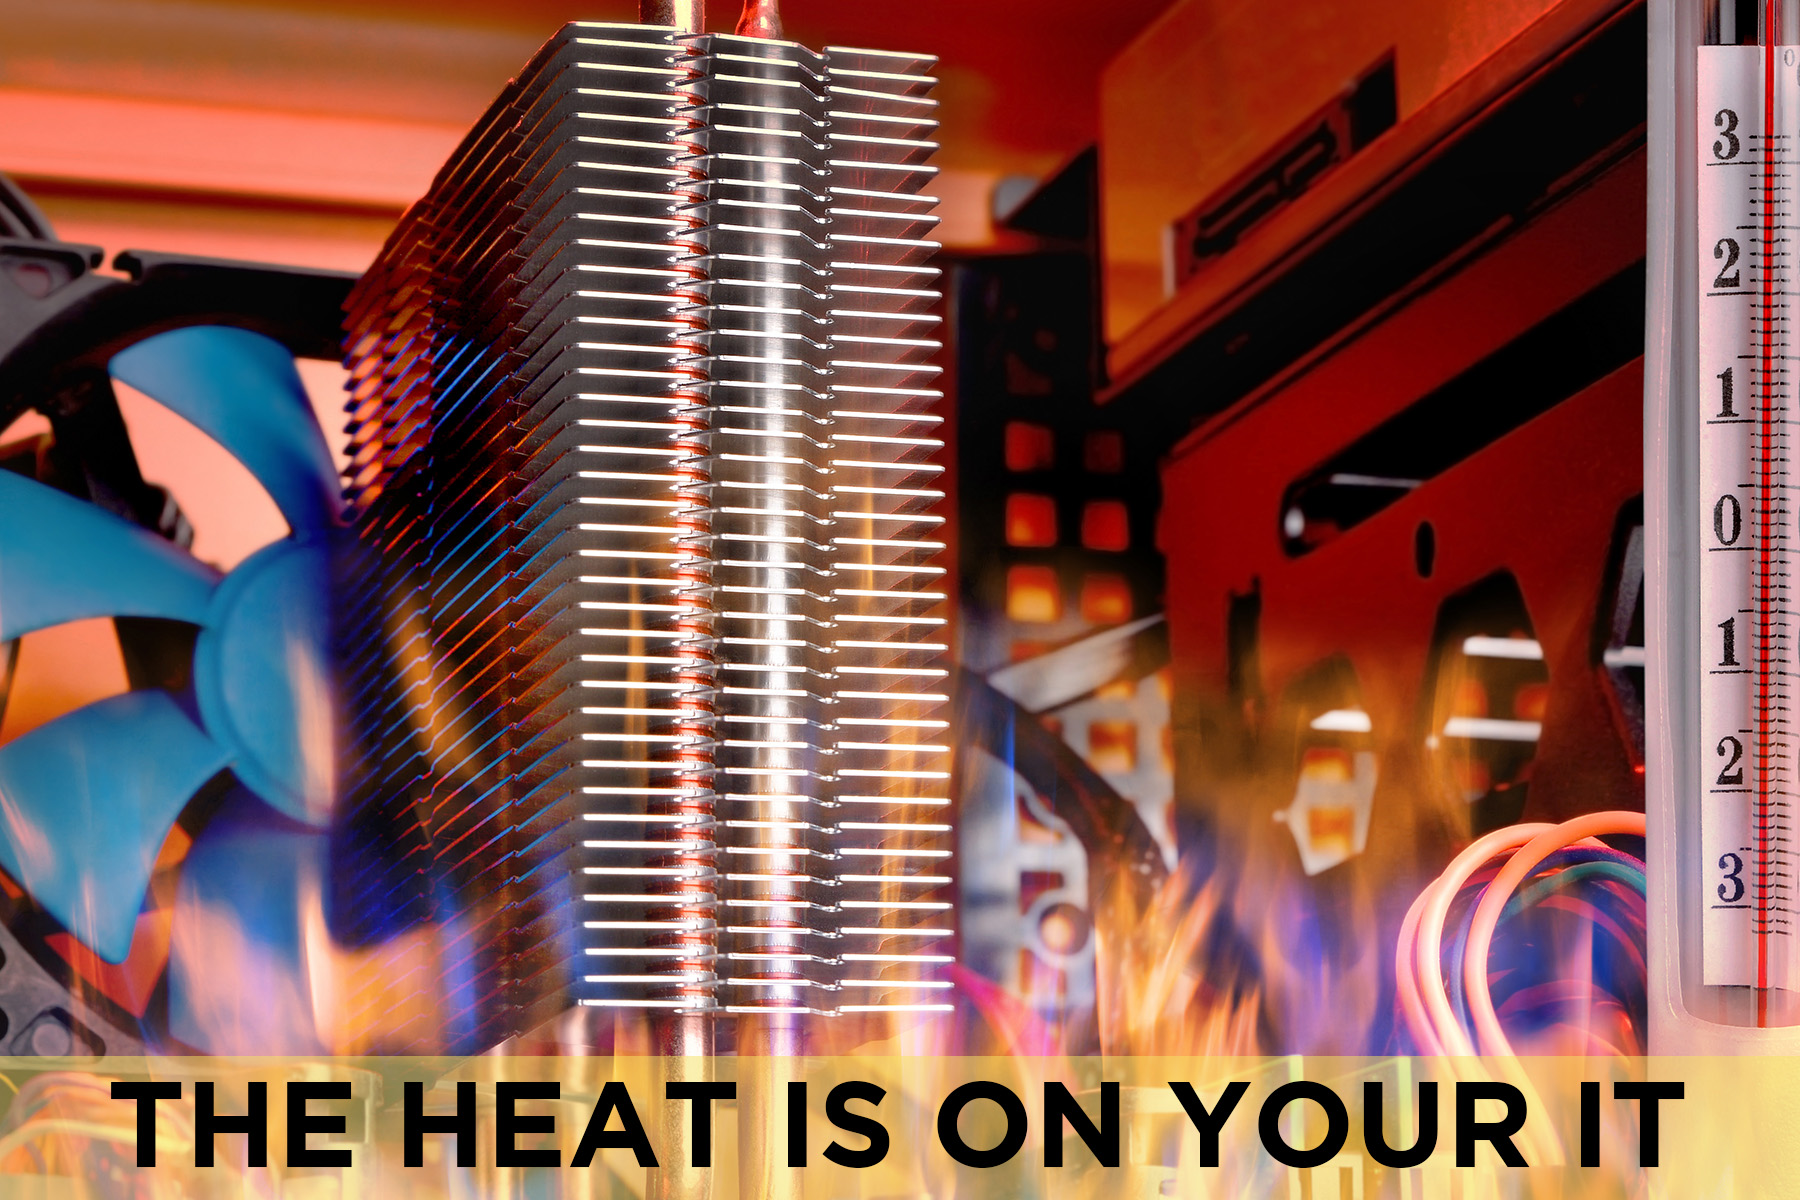 The Heat is On Your IT